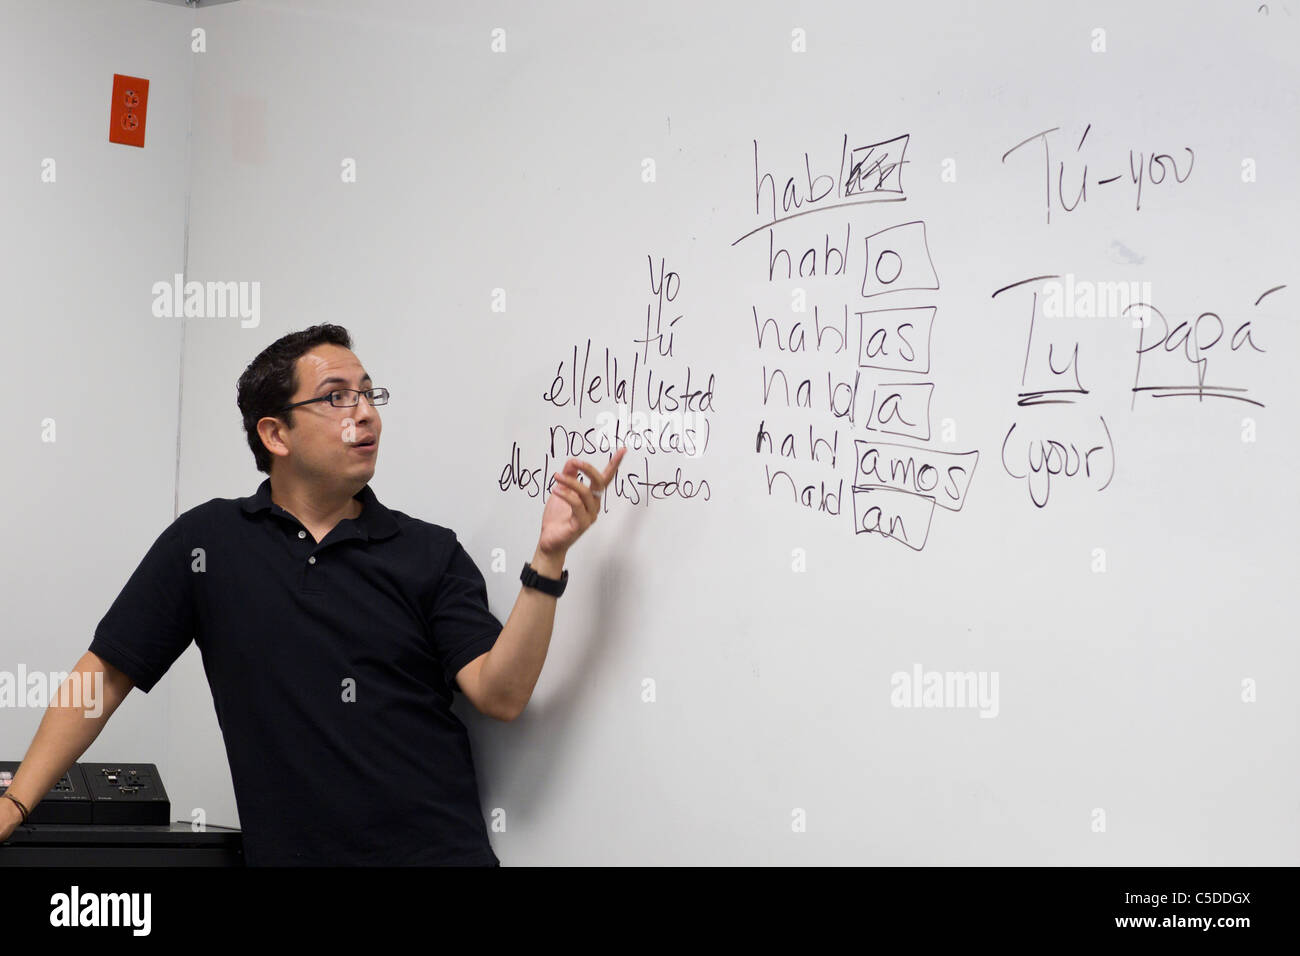 Hispanic male Spanish language teacher points to board with verb conjugations during class in South Texas high school Stock Photo